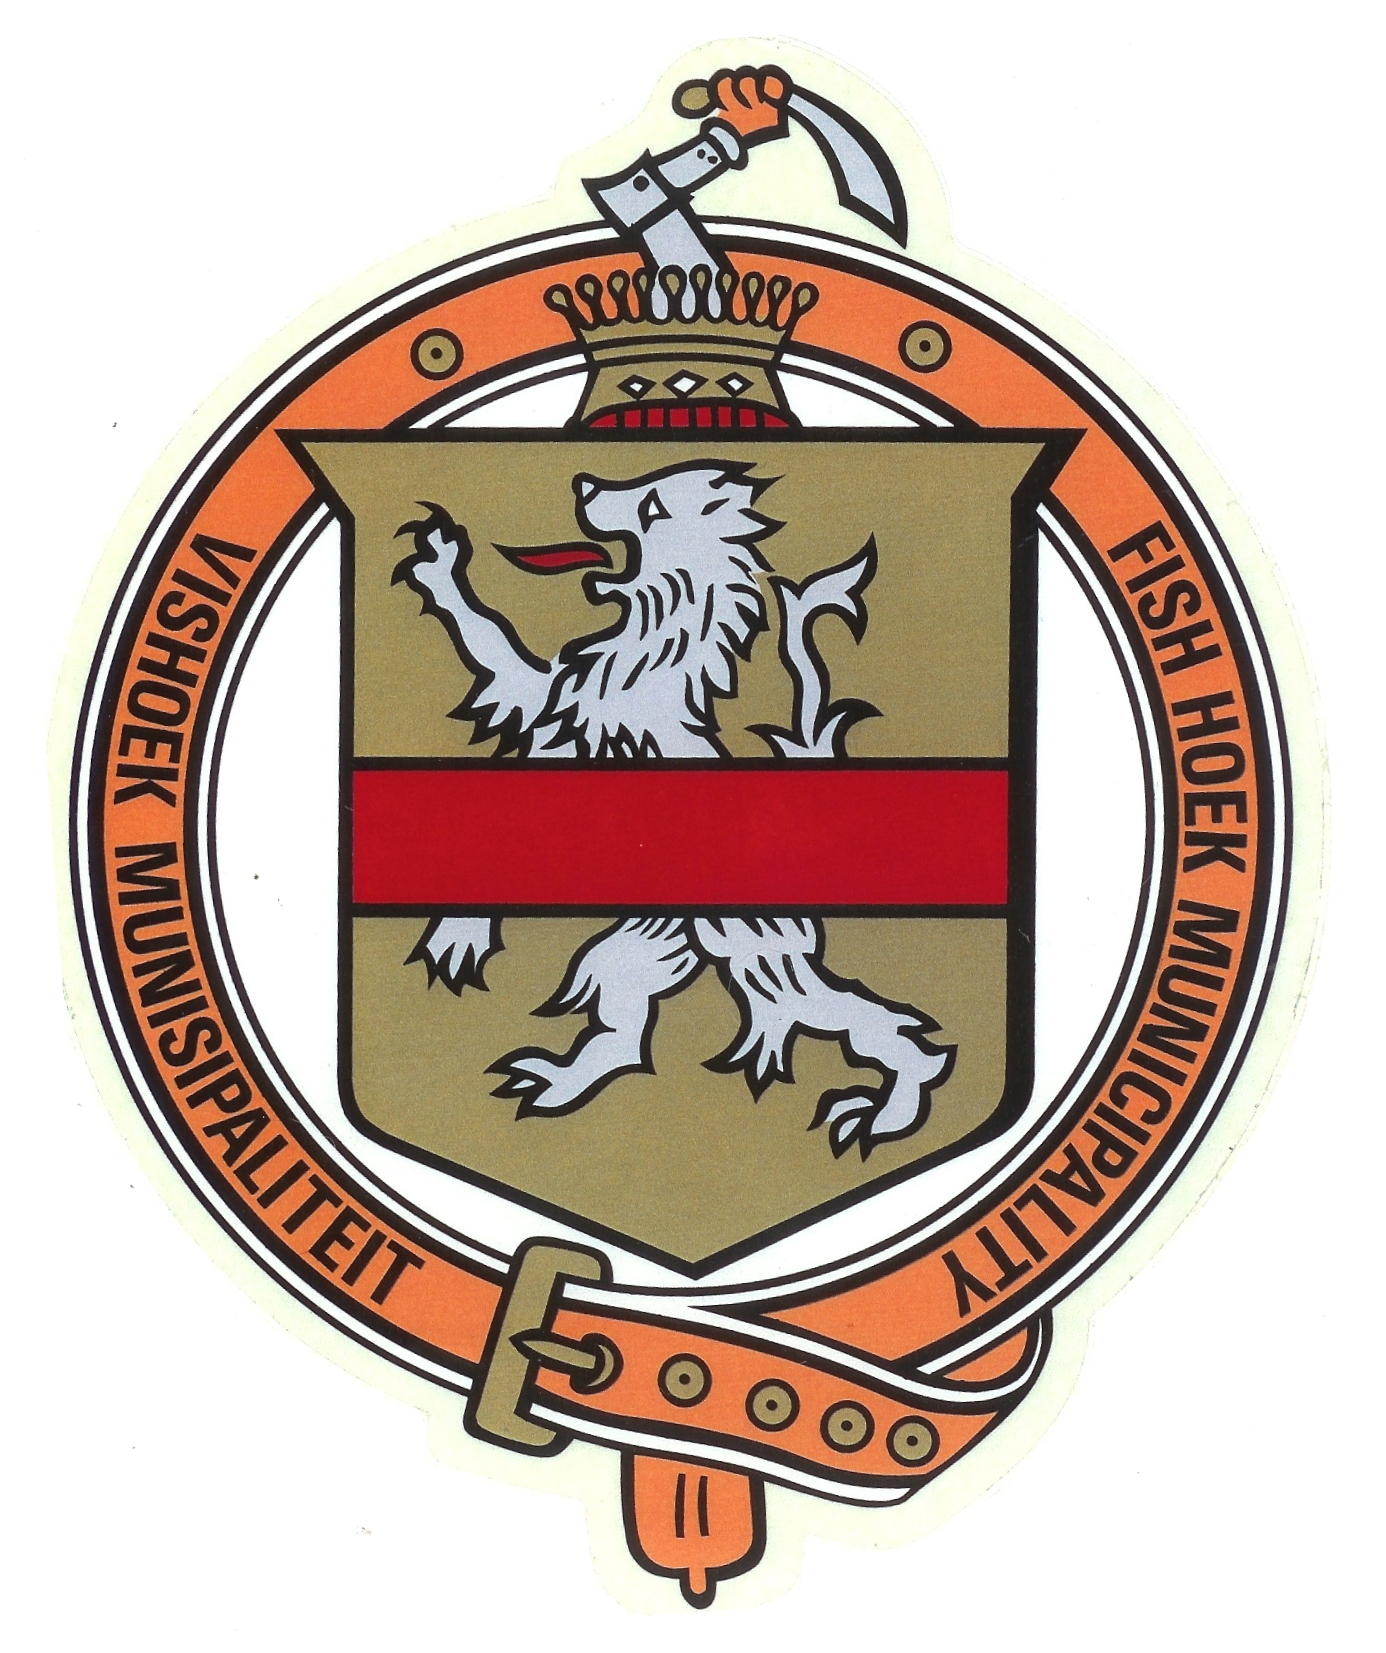 (incomplete) decal of the arms of Fish Hoek as borne on the doors of municipal vehicles